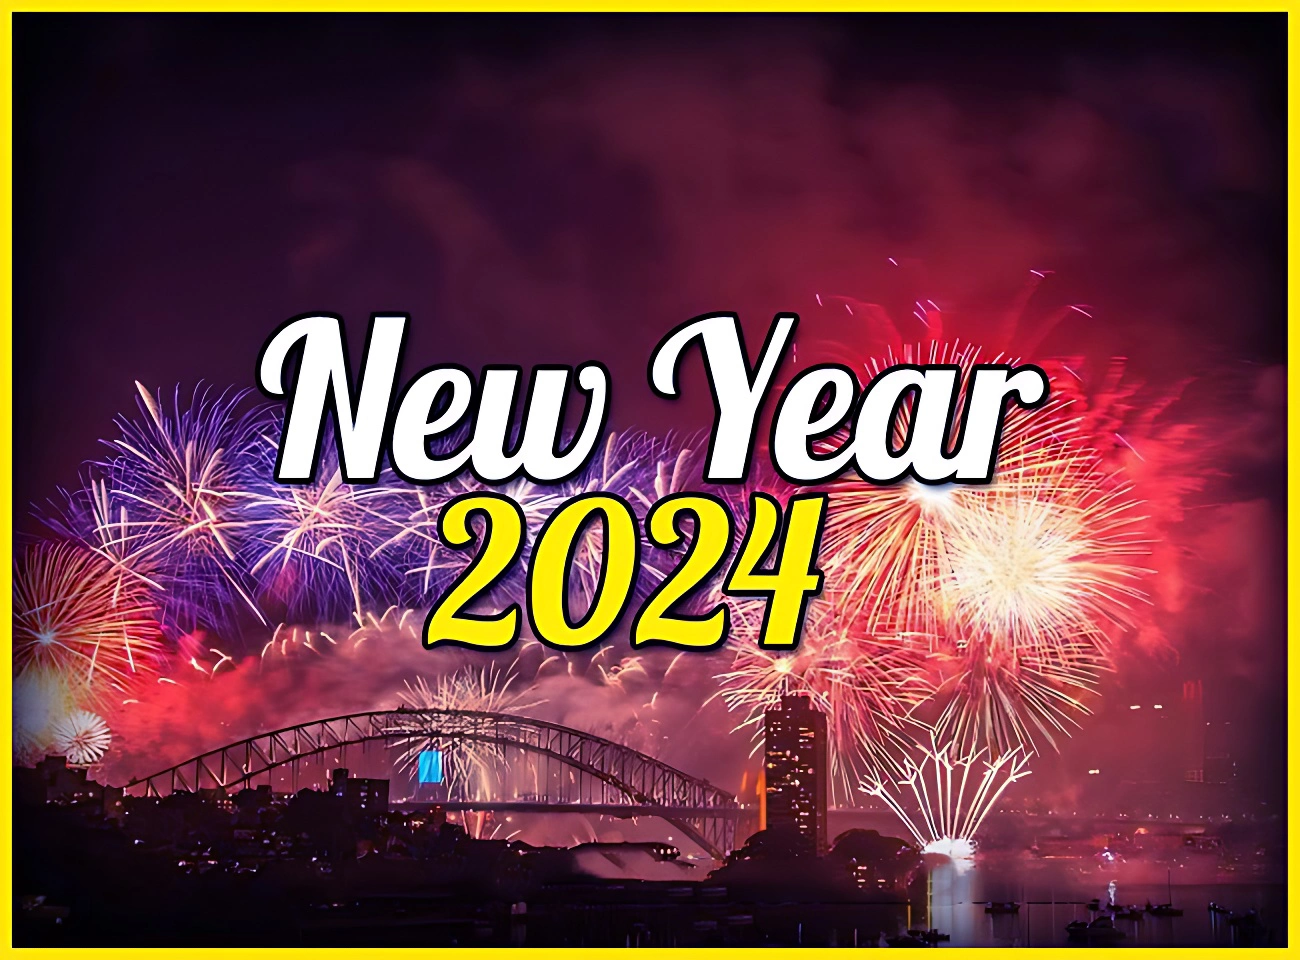 2024 New Year eve's firework image for wallpaper